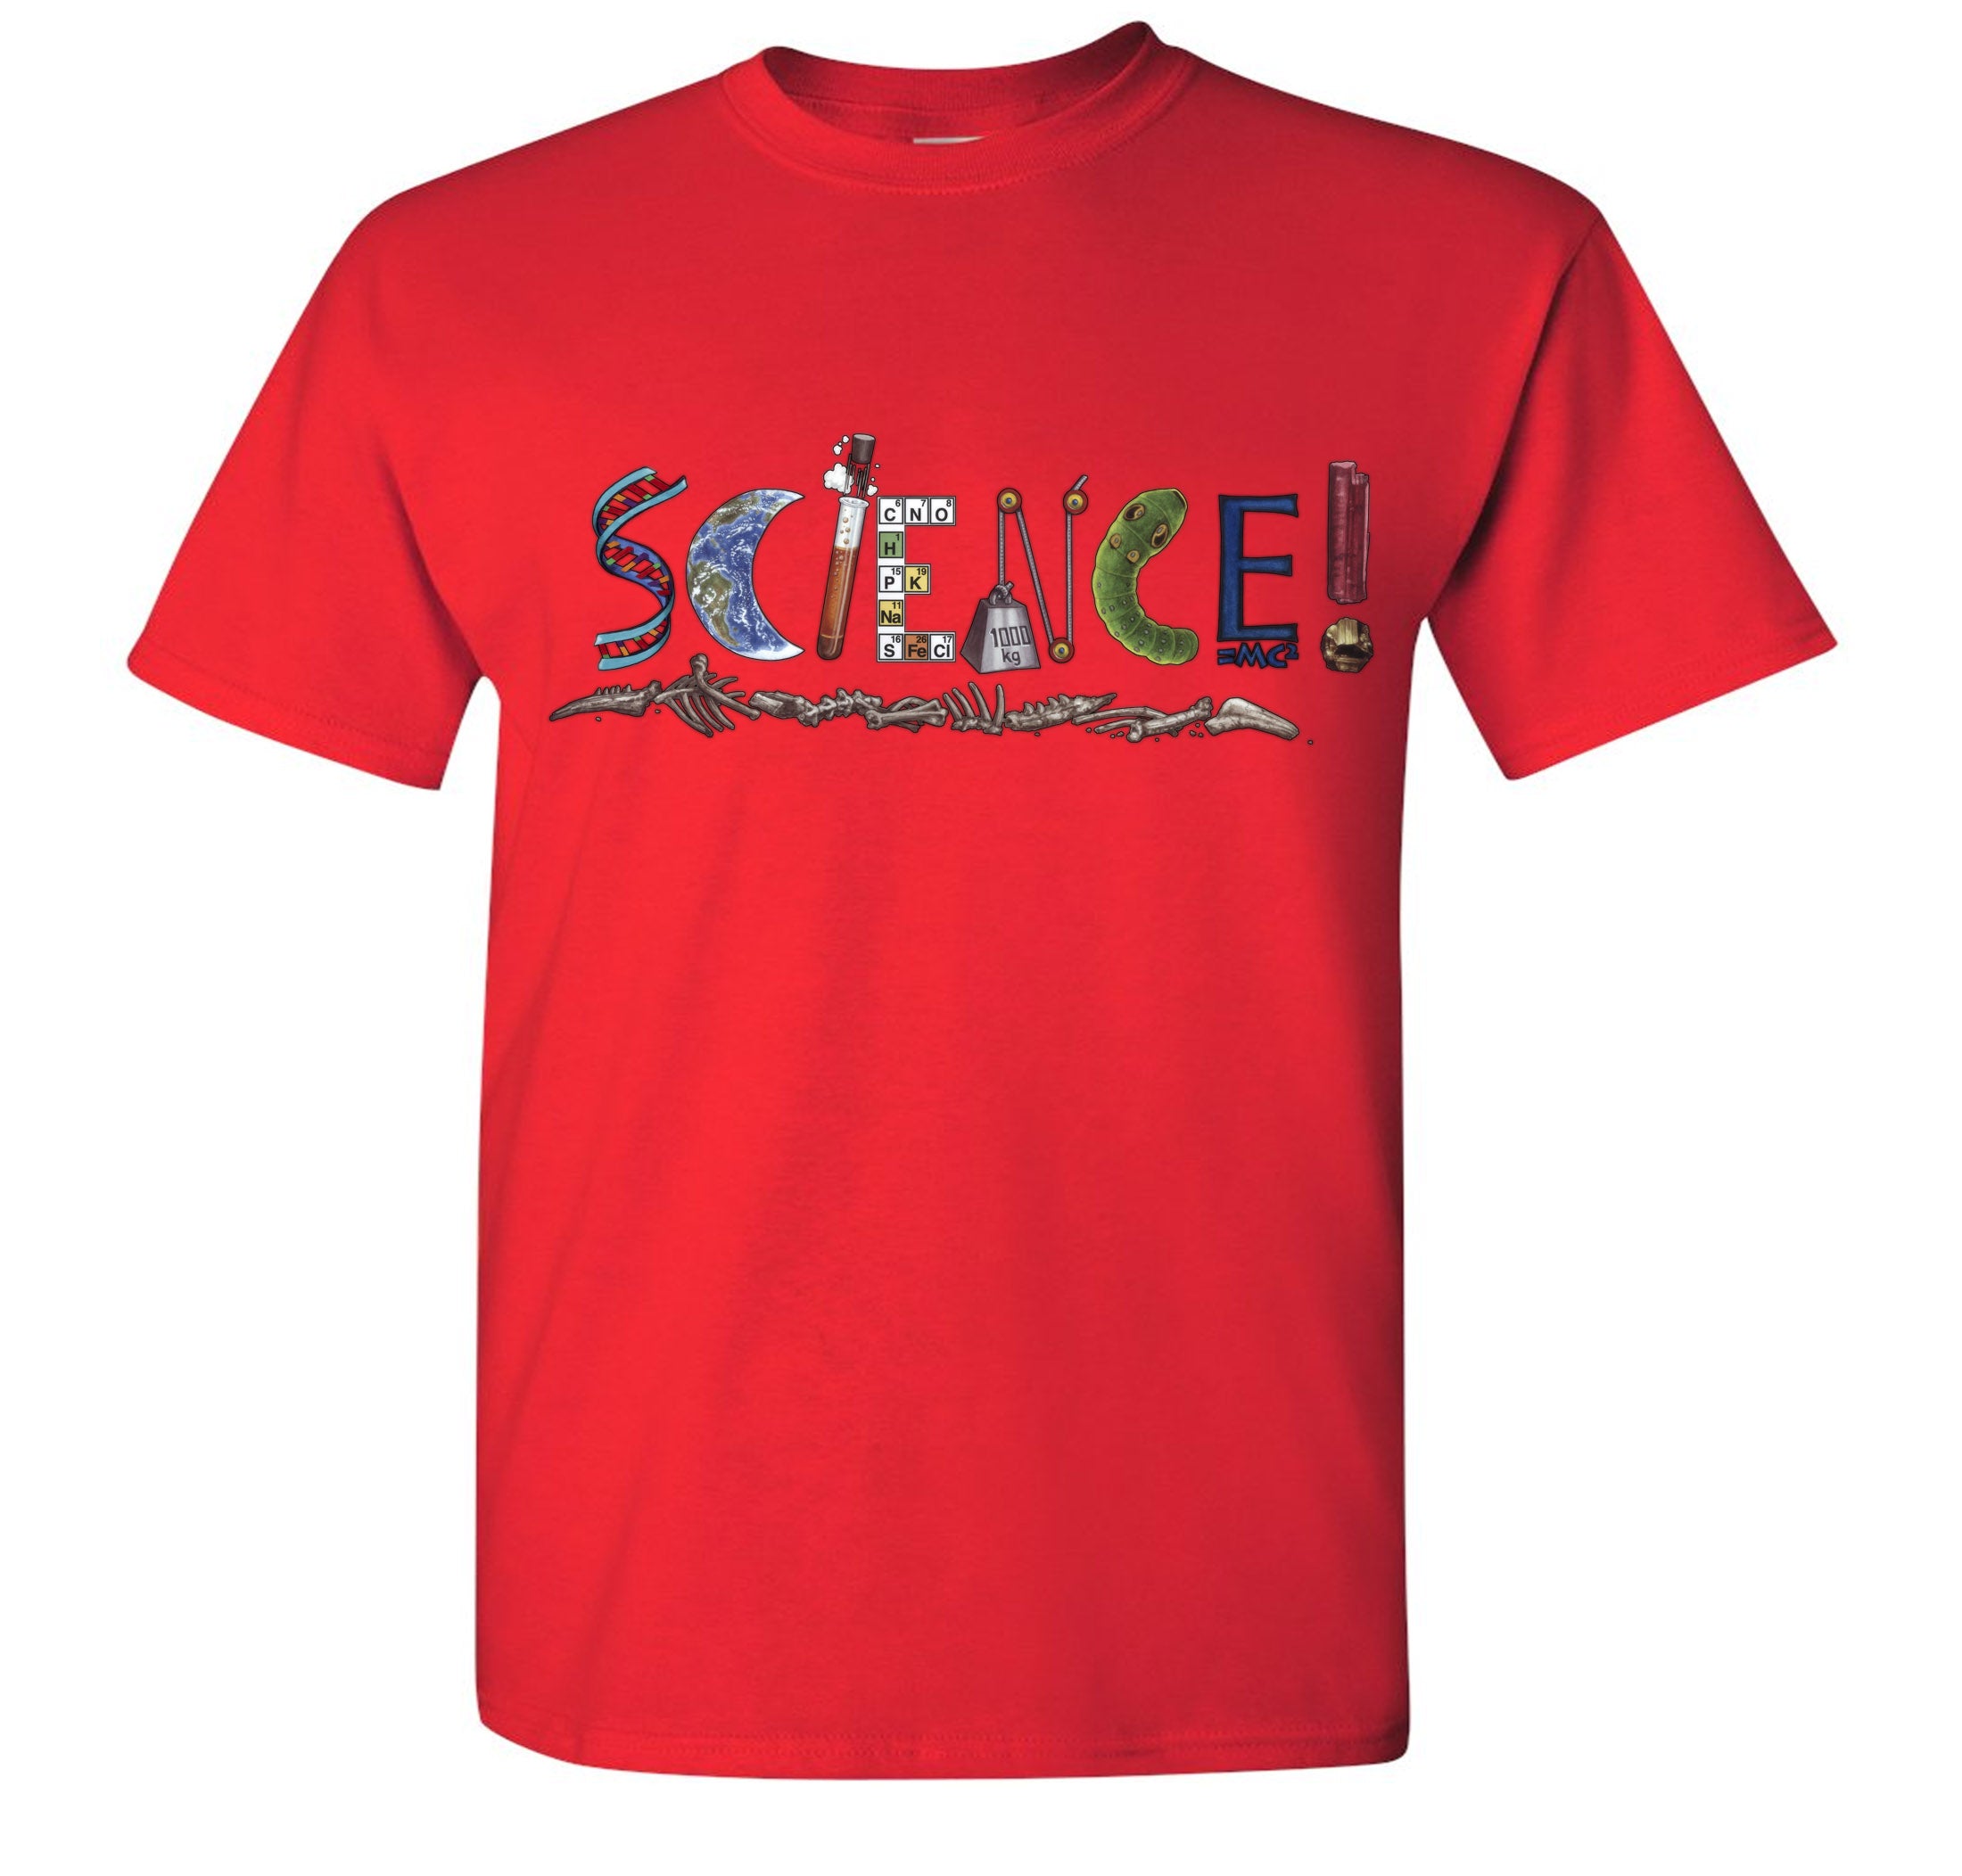 Elemental Science T-Shirt - red t-shirt with science art